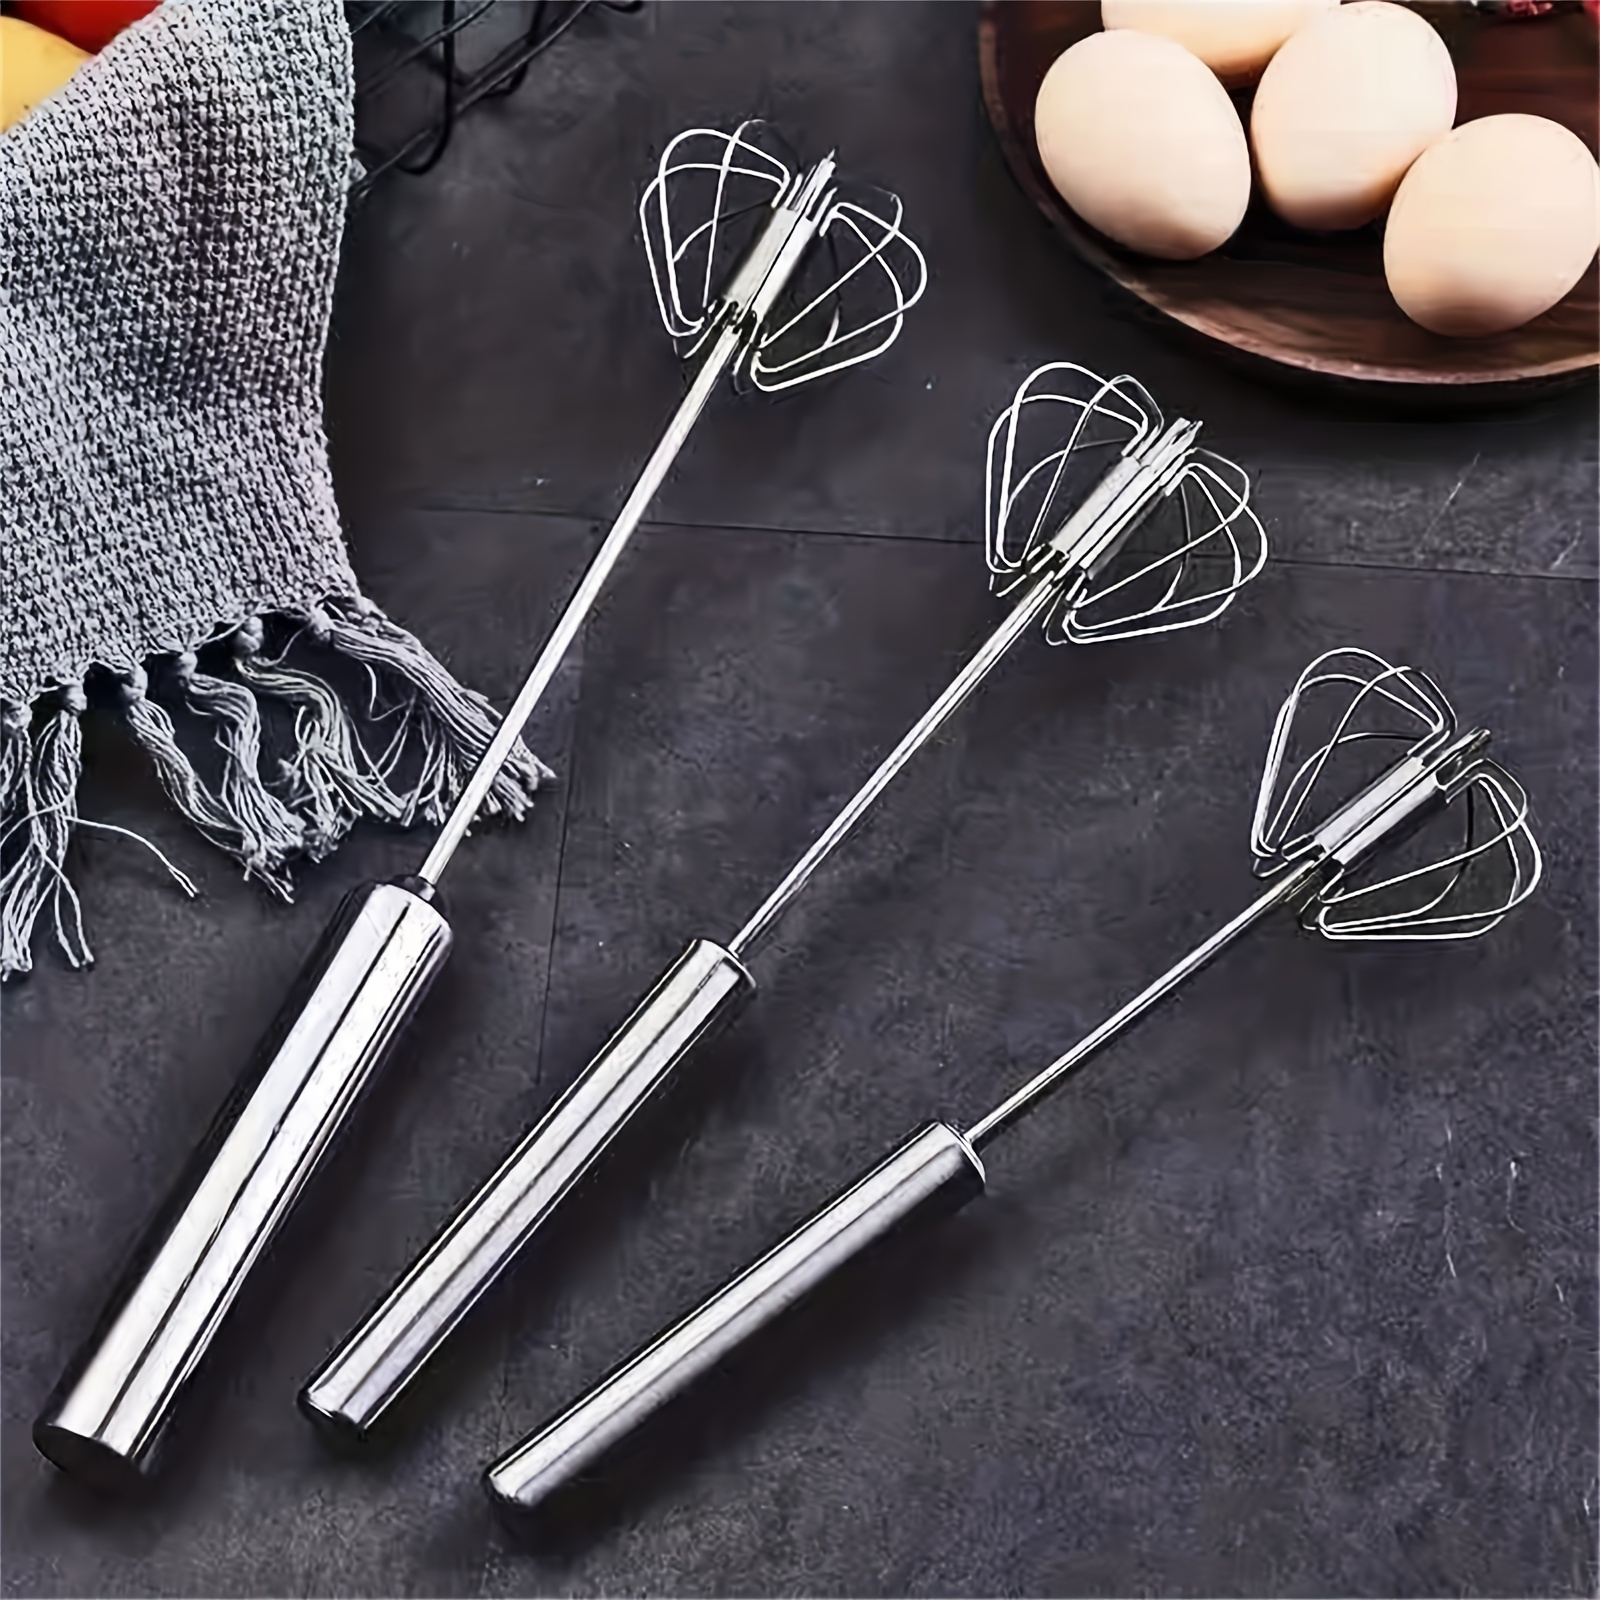 Easy Whisk Semi Automatic Stainless Whisks Hand Push Egg Beater Milk Whip  Mixer